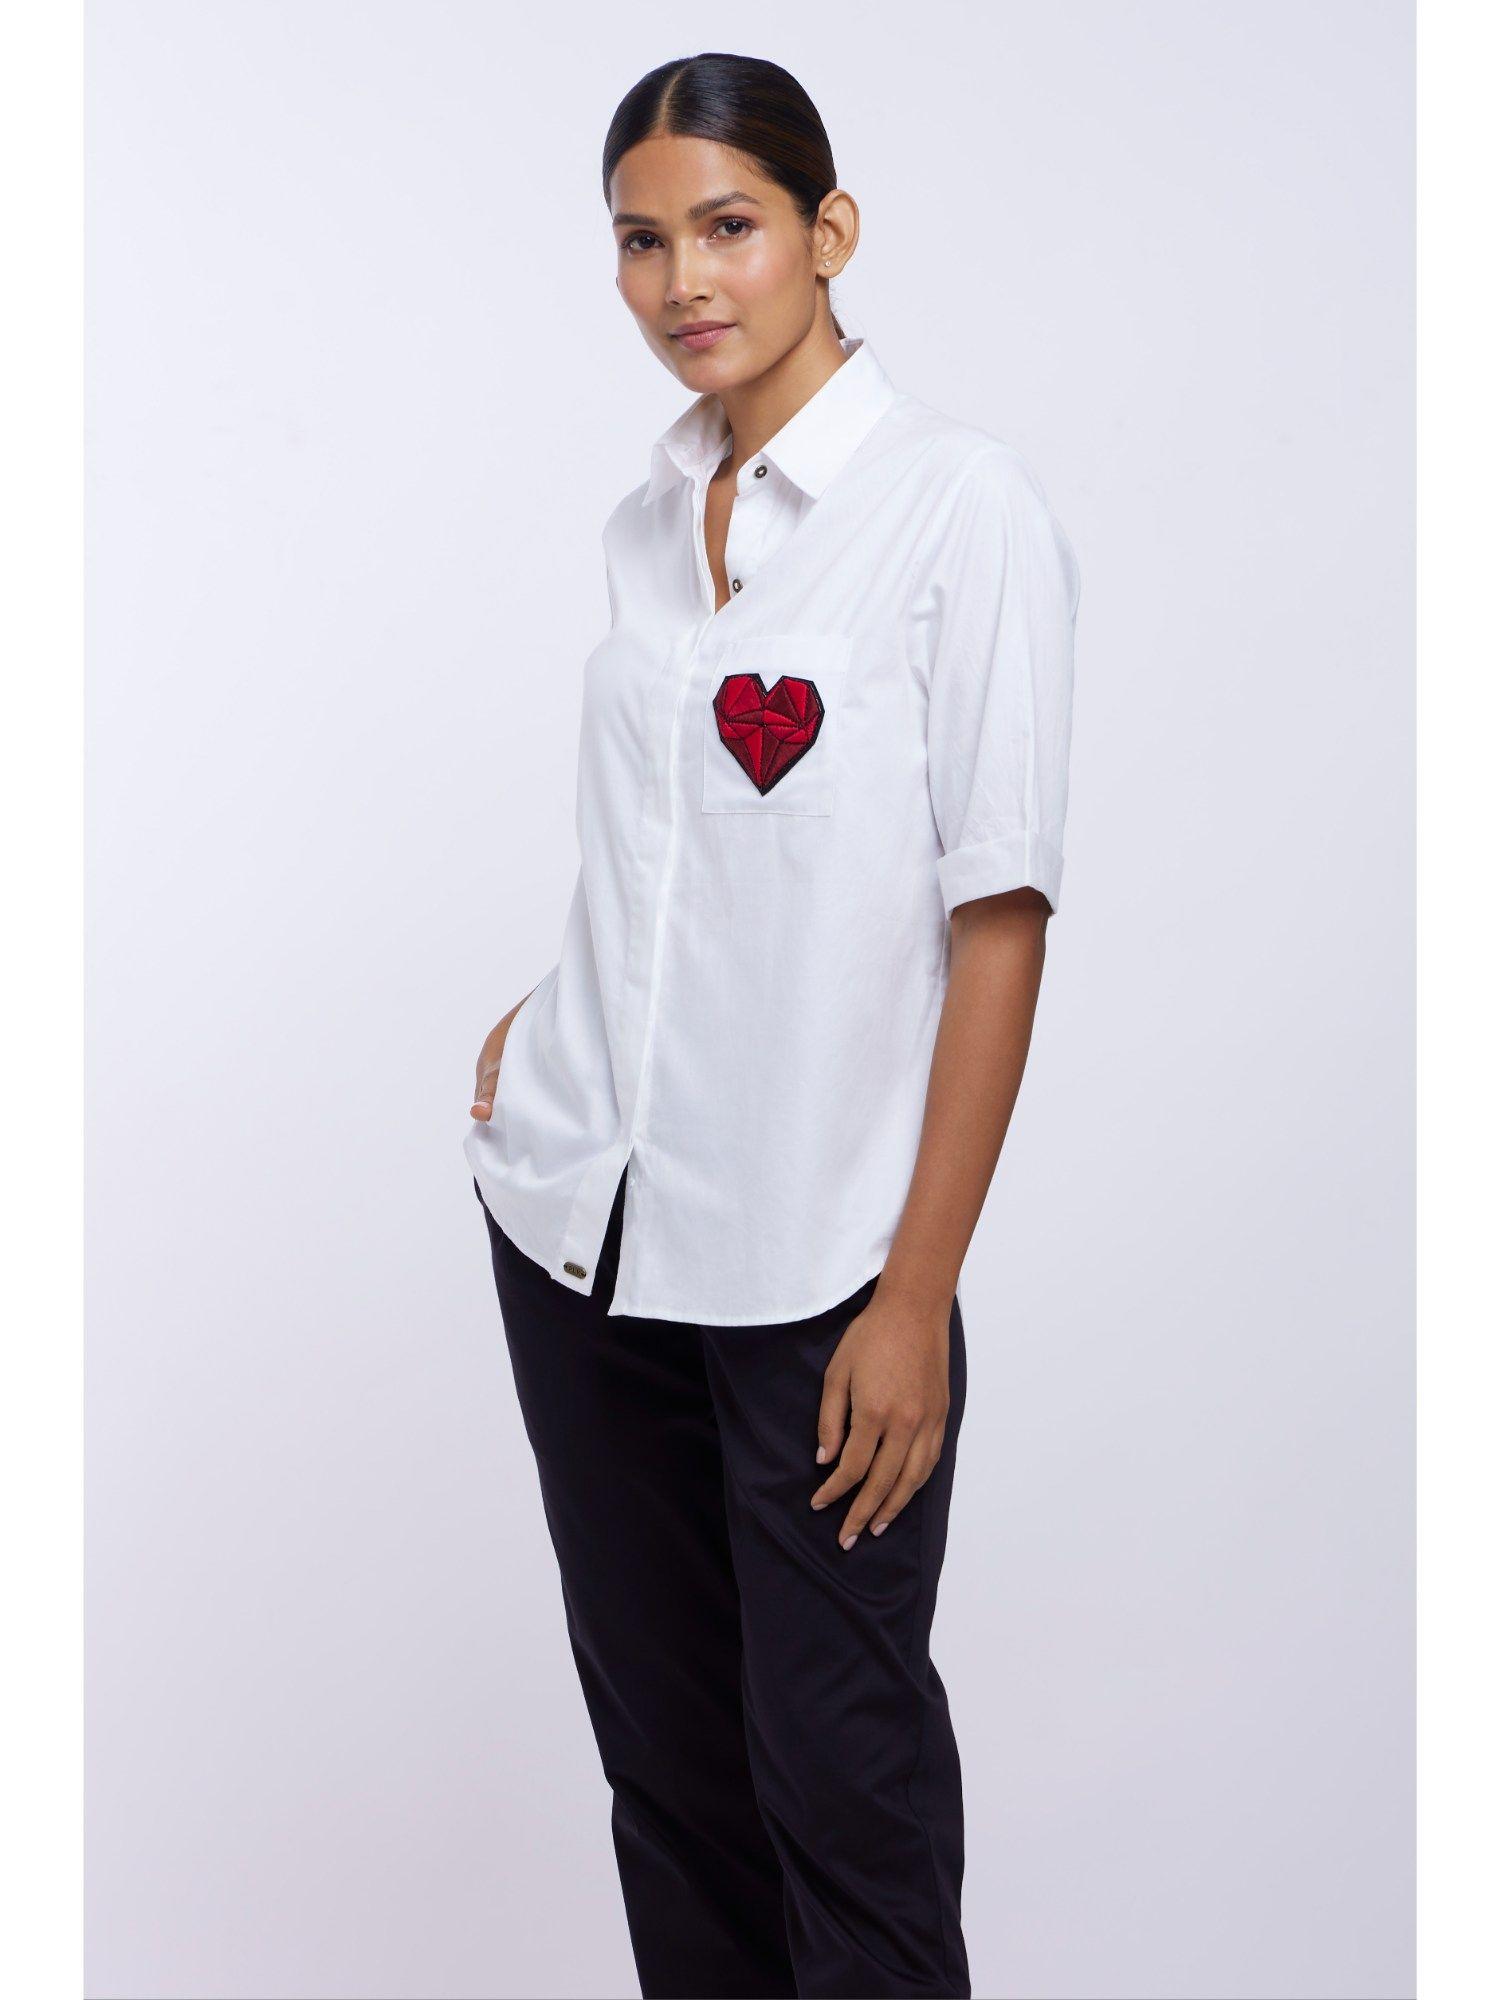 red embroidered heart white shirt